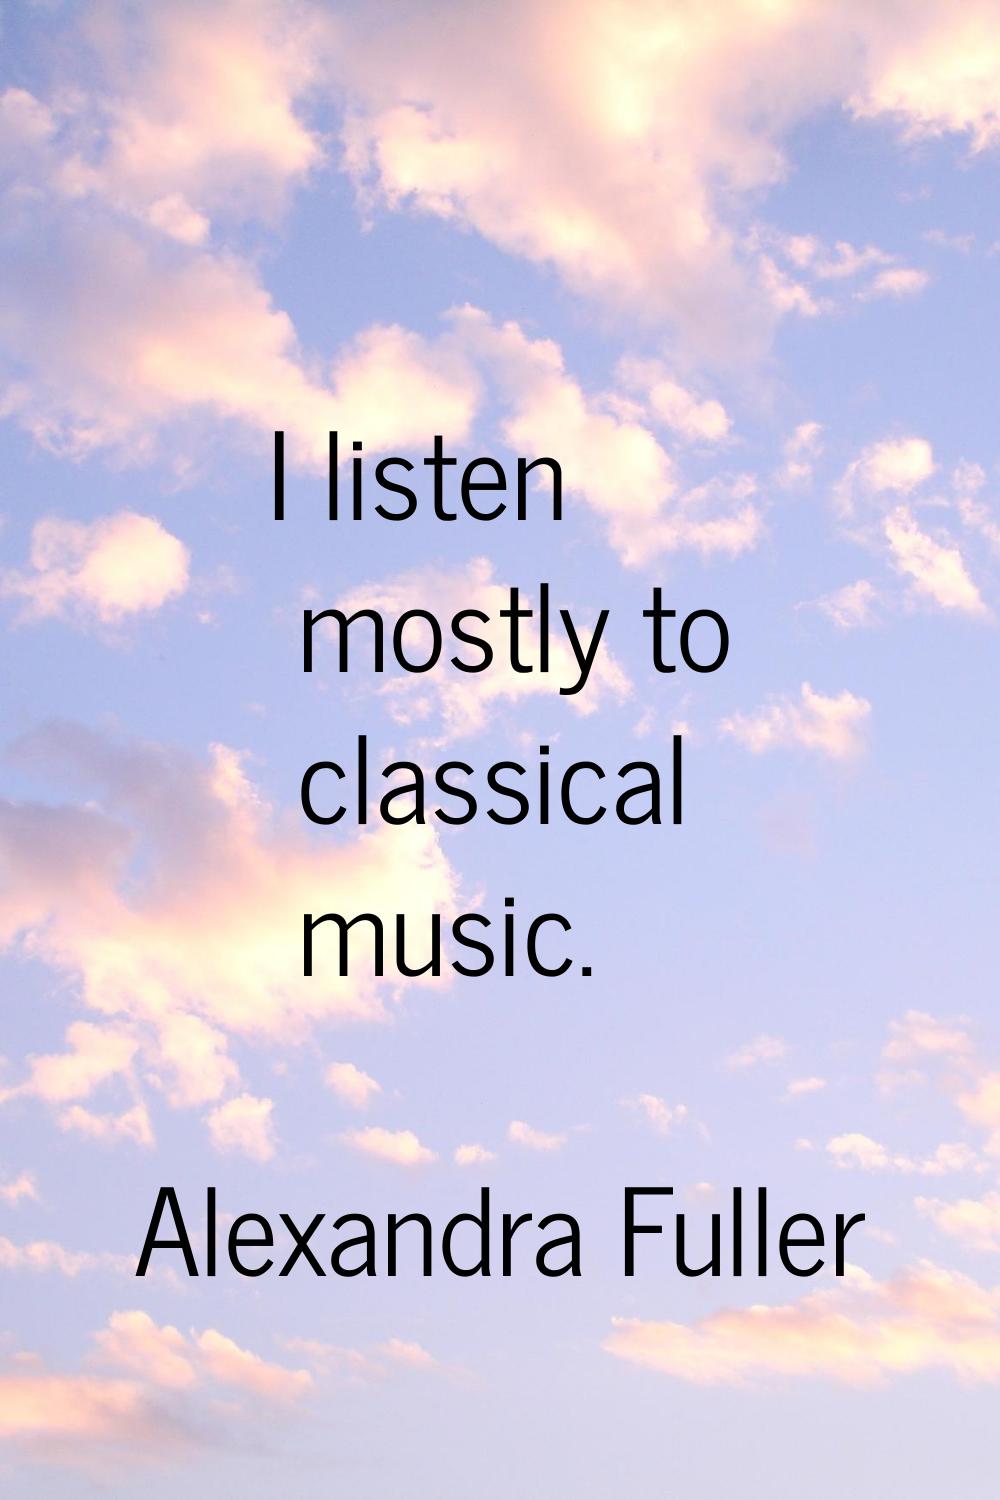 I listen mostly to classical music.